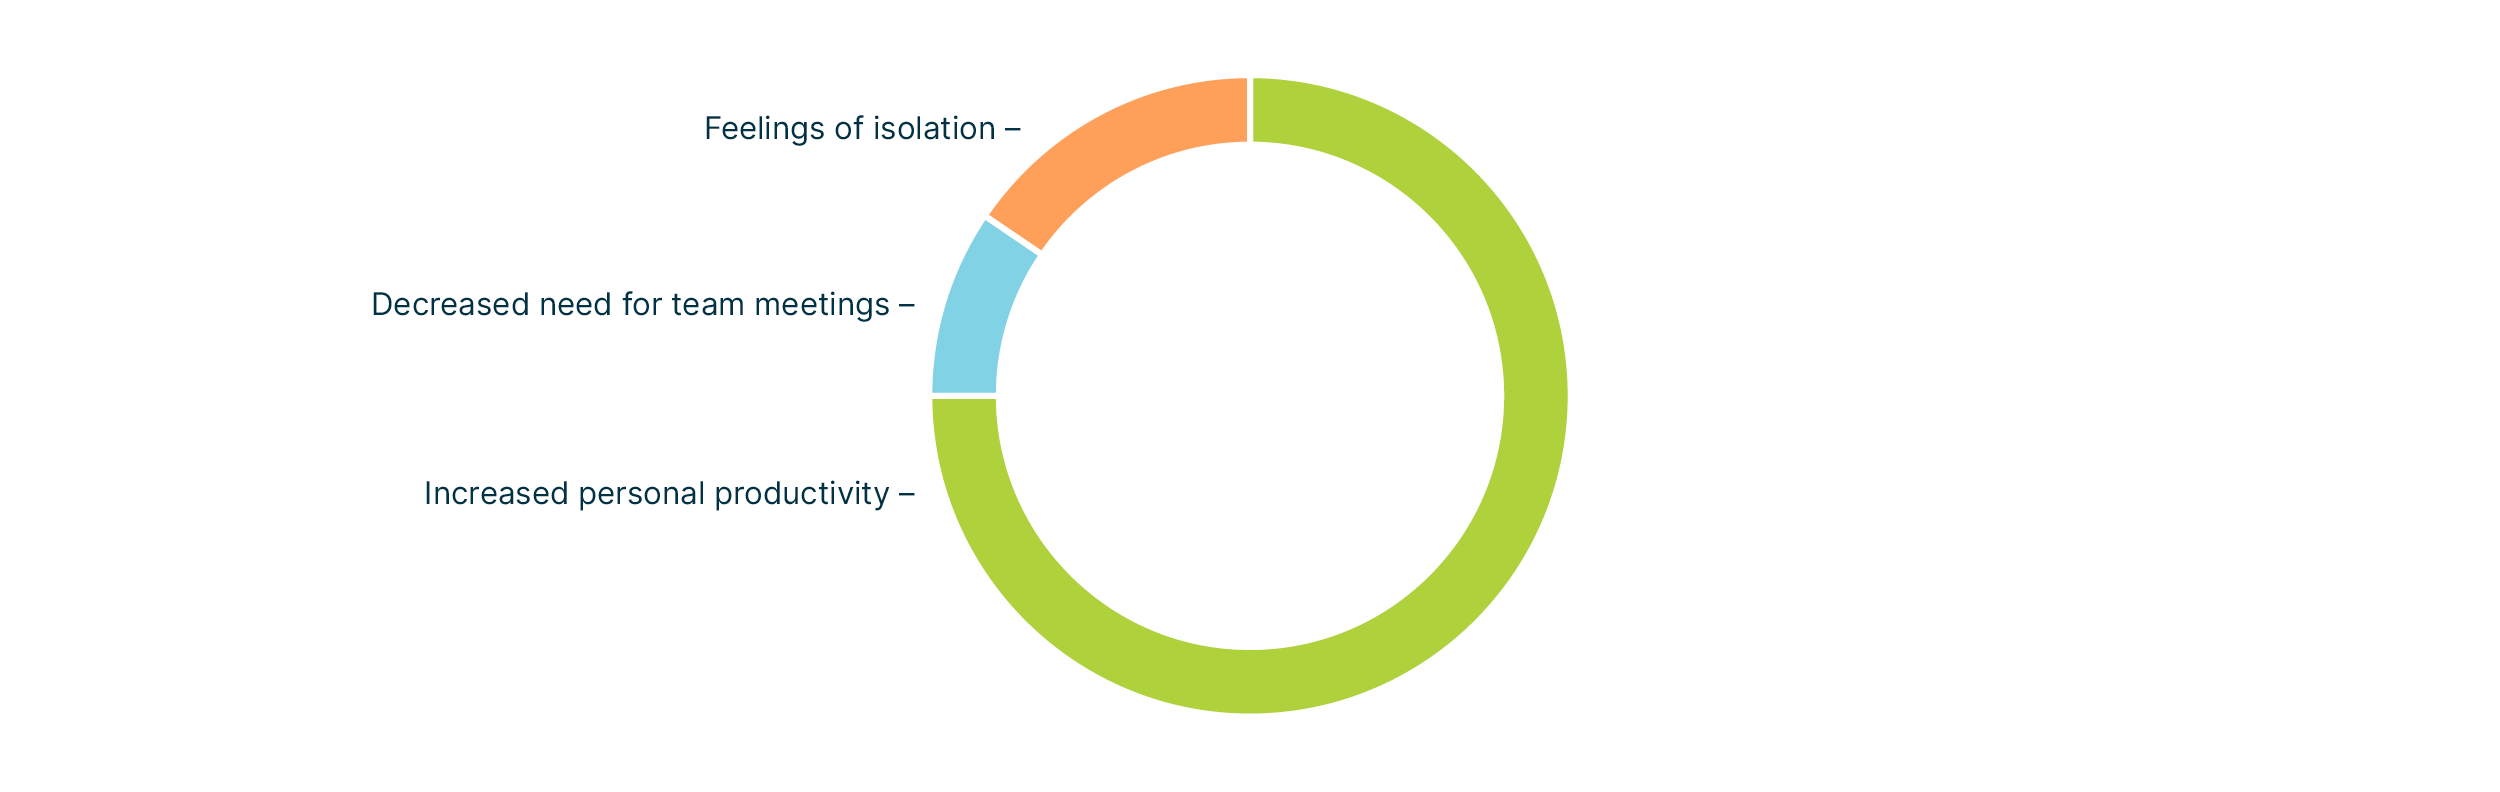 Results of an internal survey showing a feeling of isolation among a minority of employees